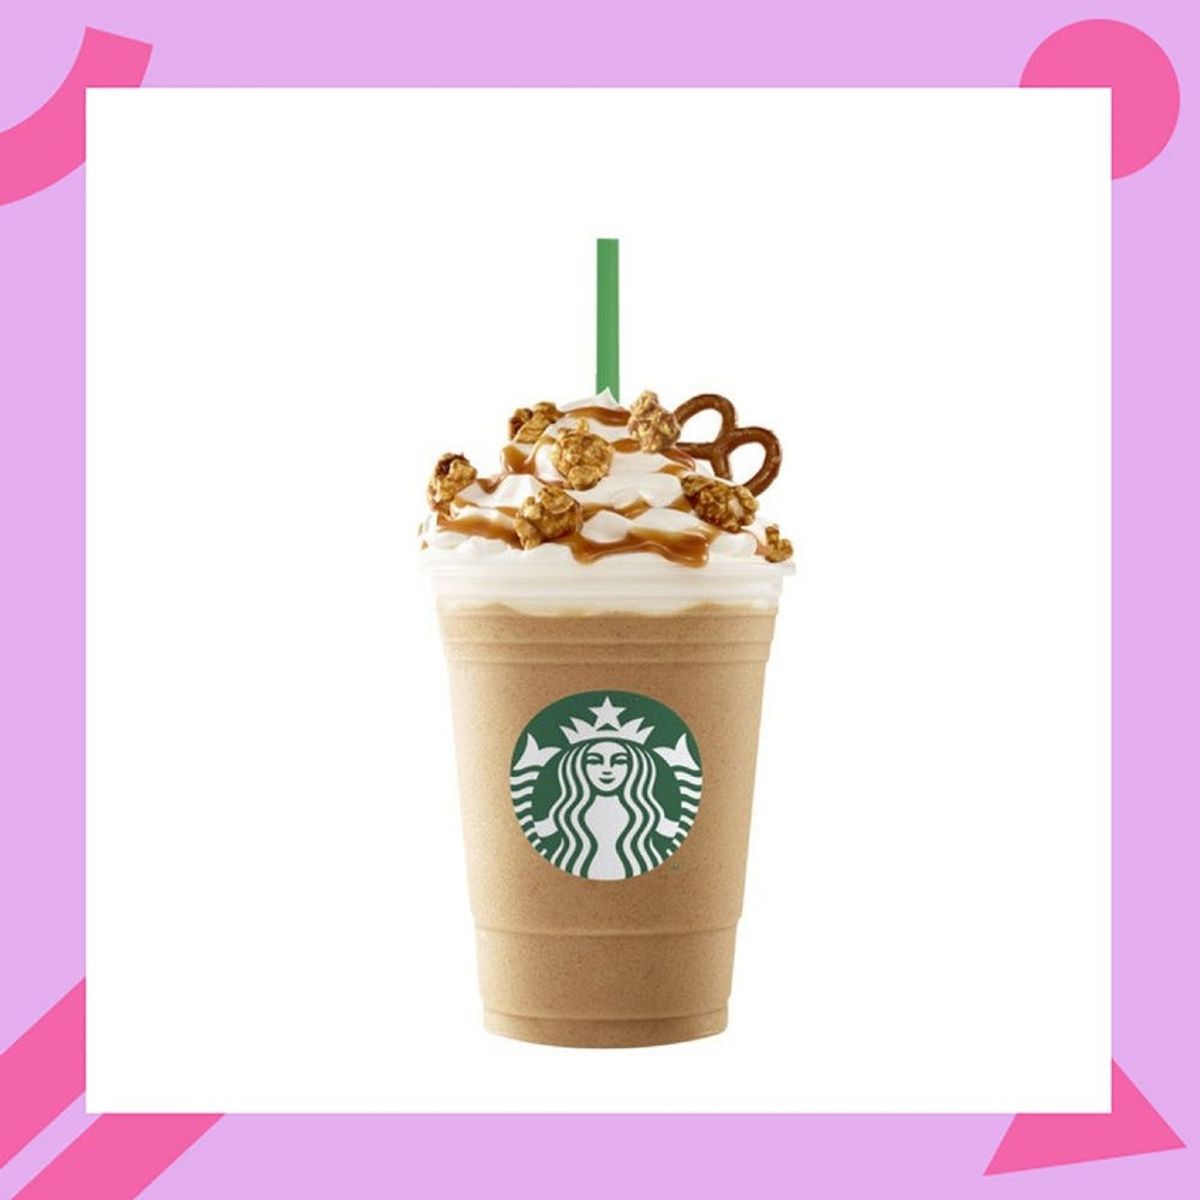 This New Caramel Pretzel Frappuccino Features Another Unexpected, Crunchy Topping